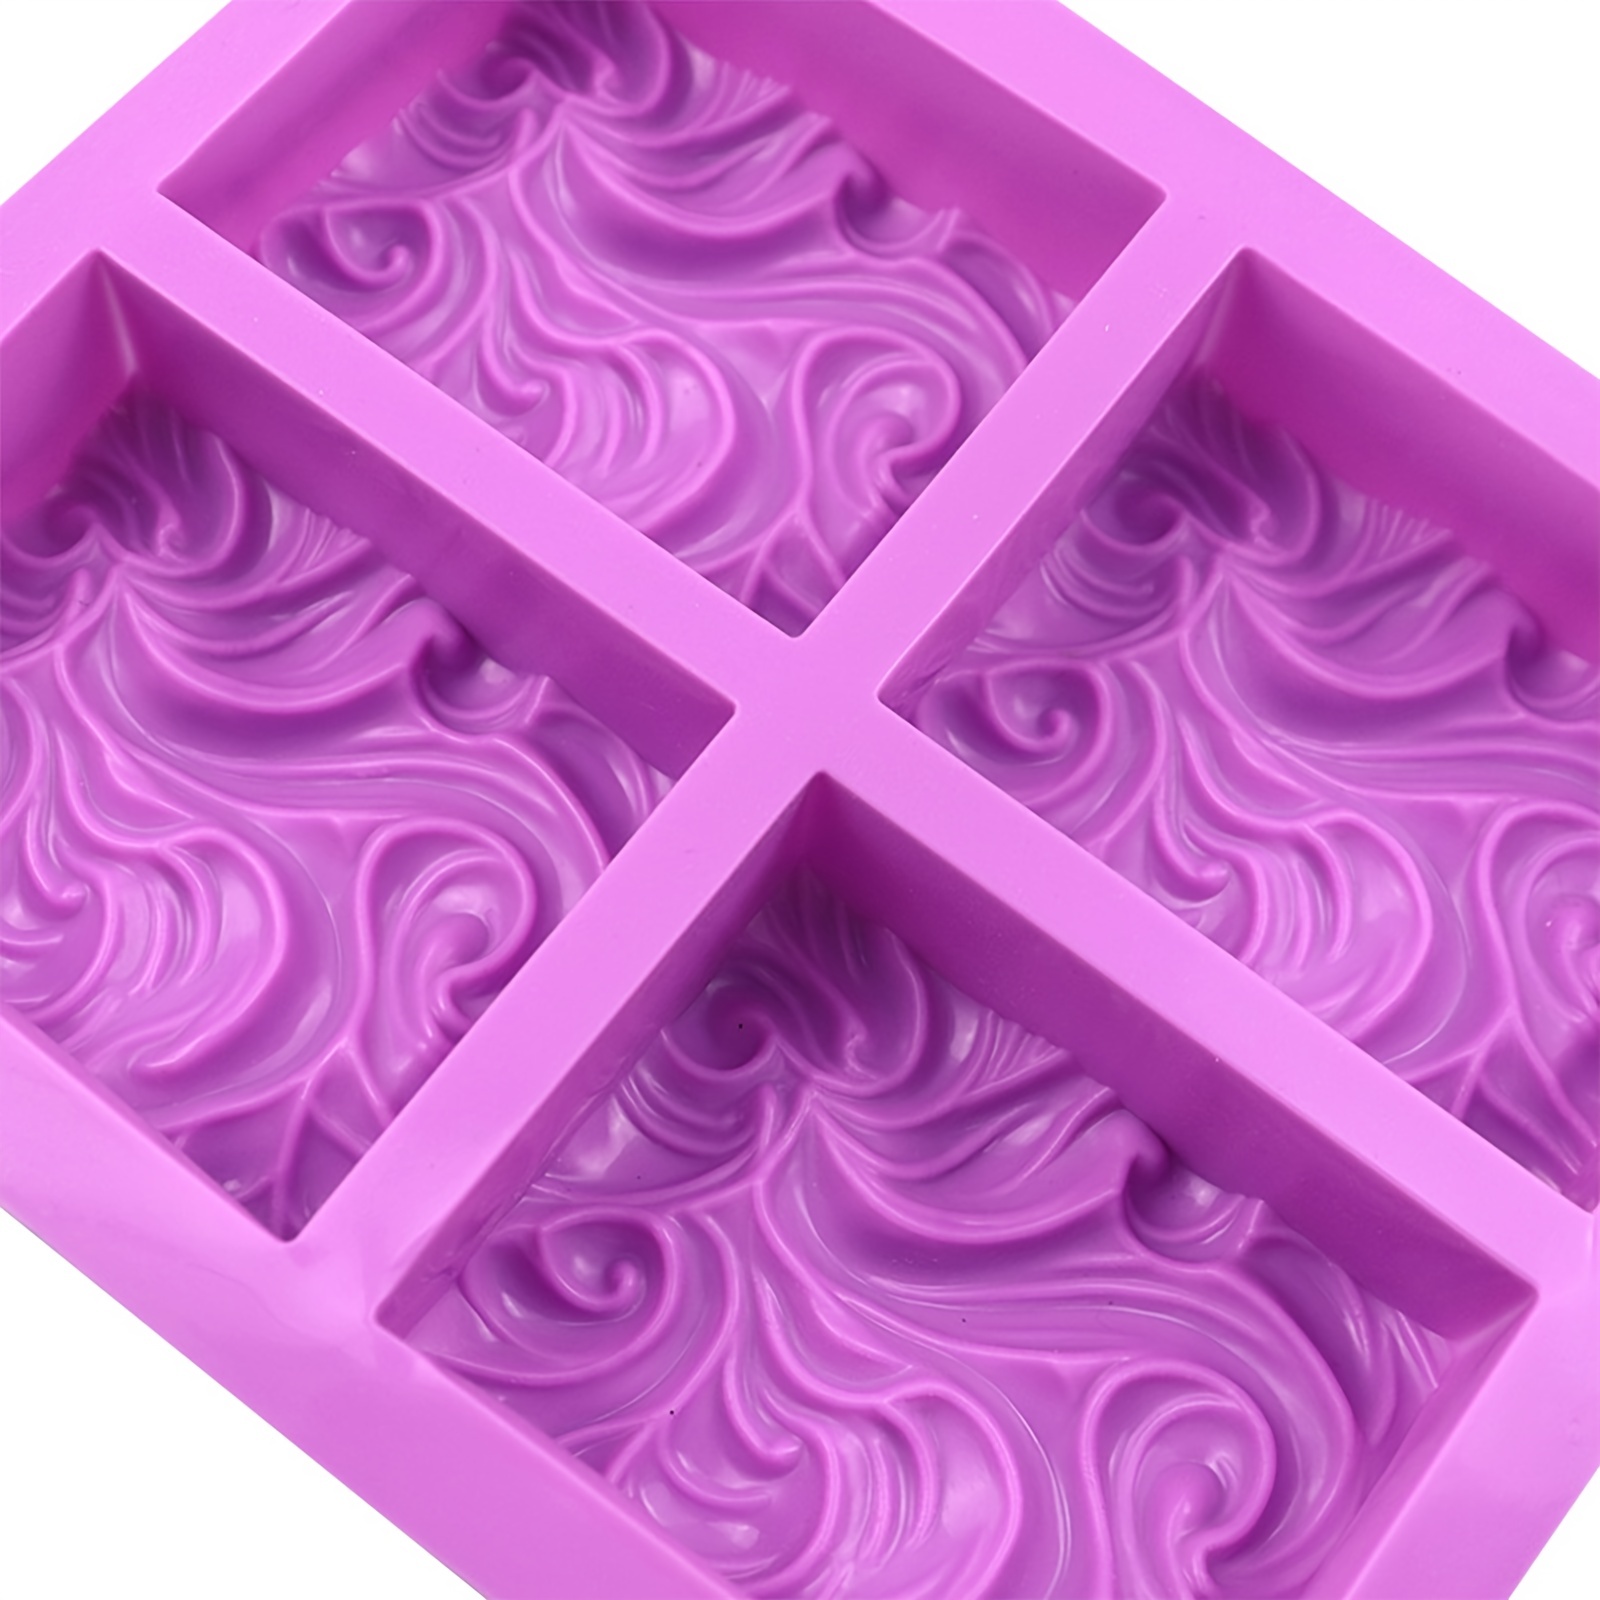 Newk Silicone Soap Square Molds, DIY Handmade Soap Molds with Ocean Wave Pattern for Milk Soap (3.5 oz Cavities)